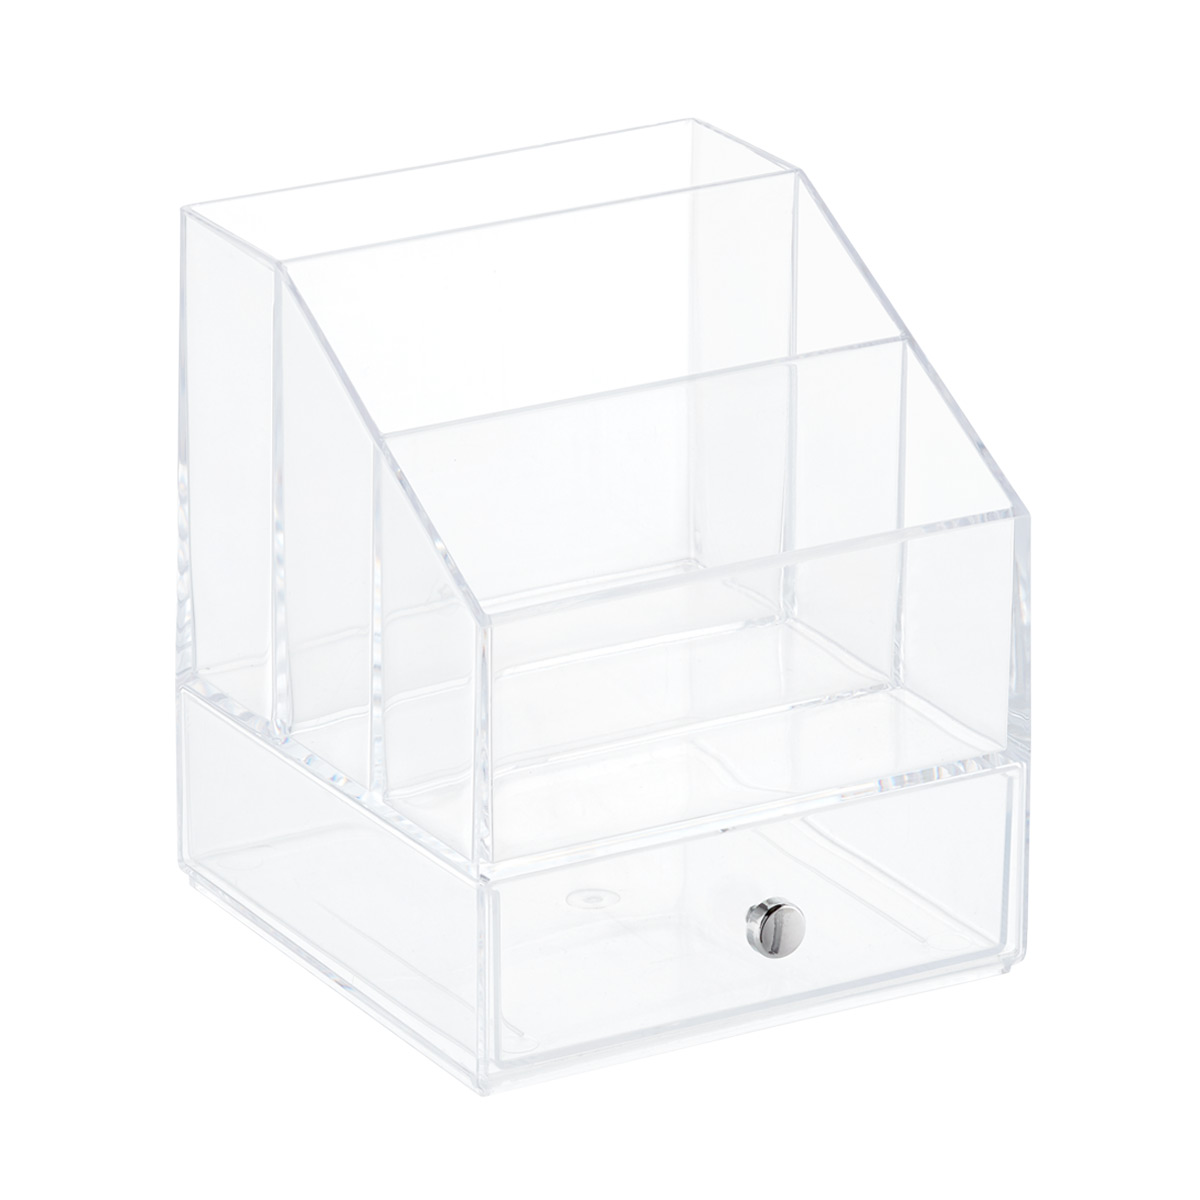 iDESIGN Clarity 1-Drawer Stacking Cosmetic Organizer Clear